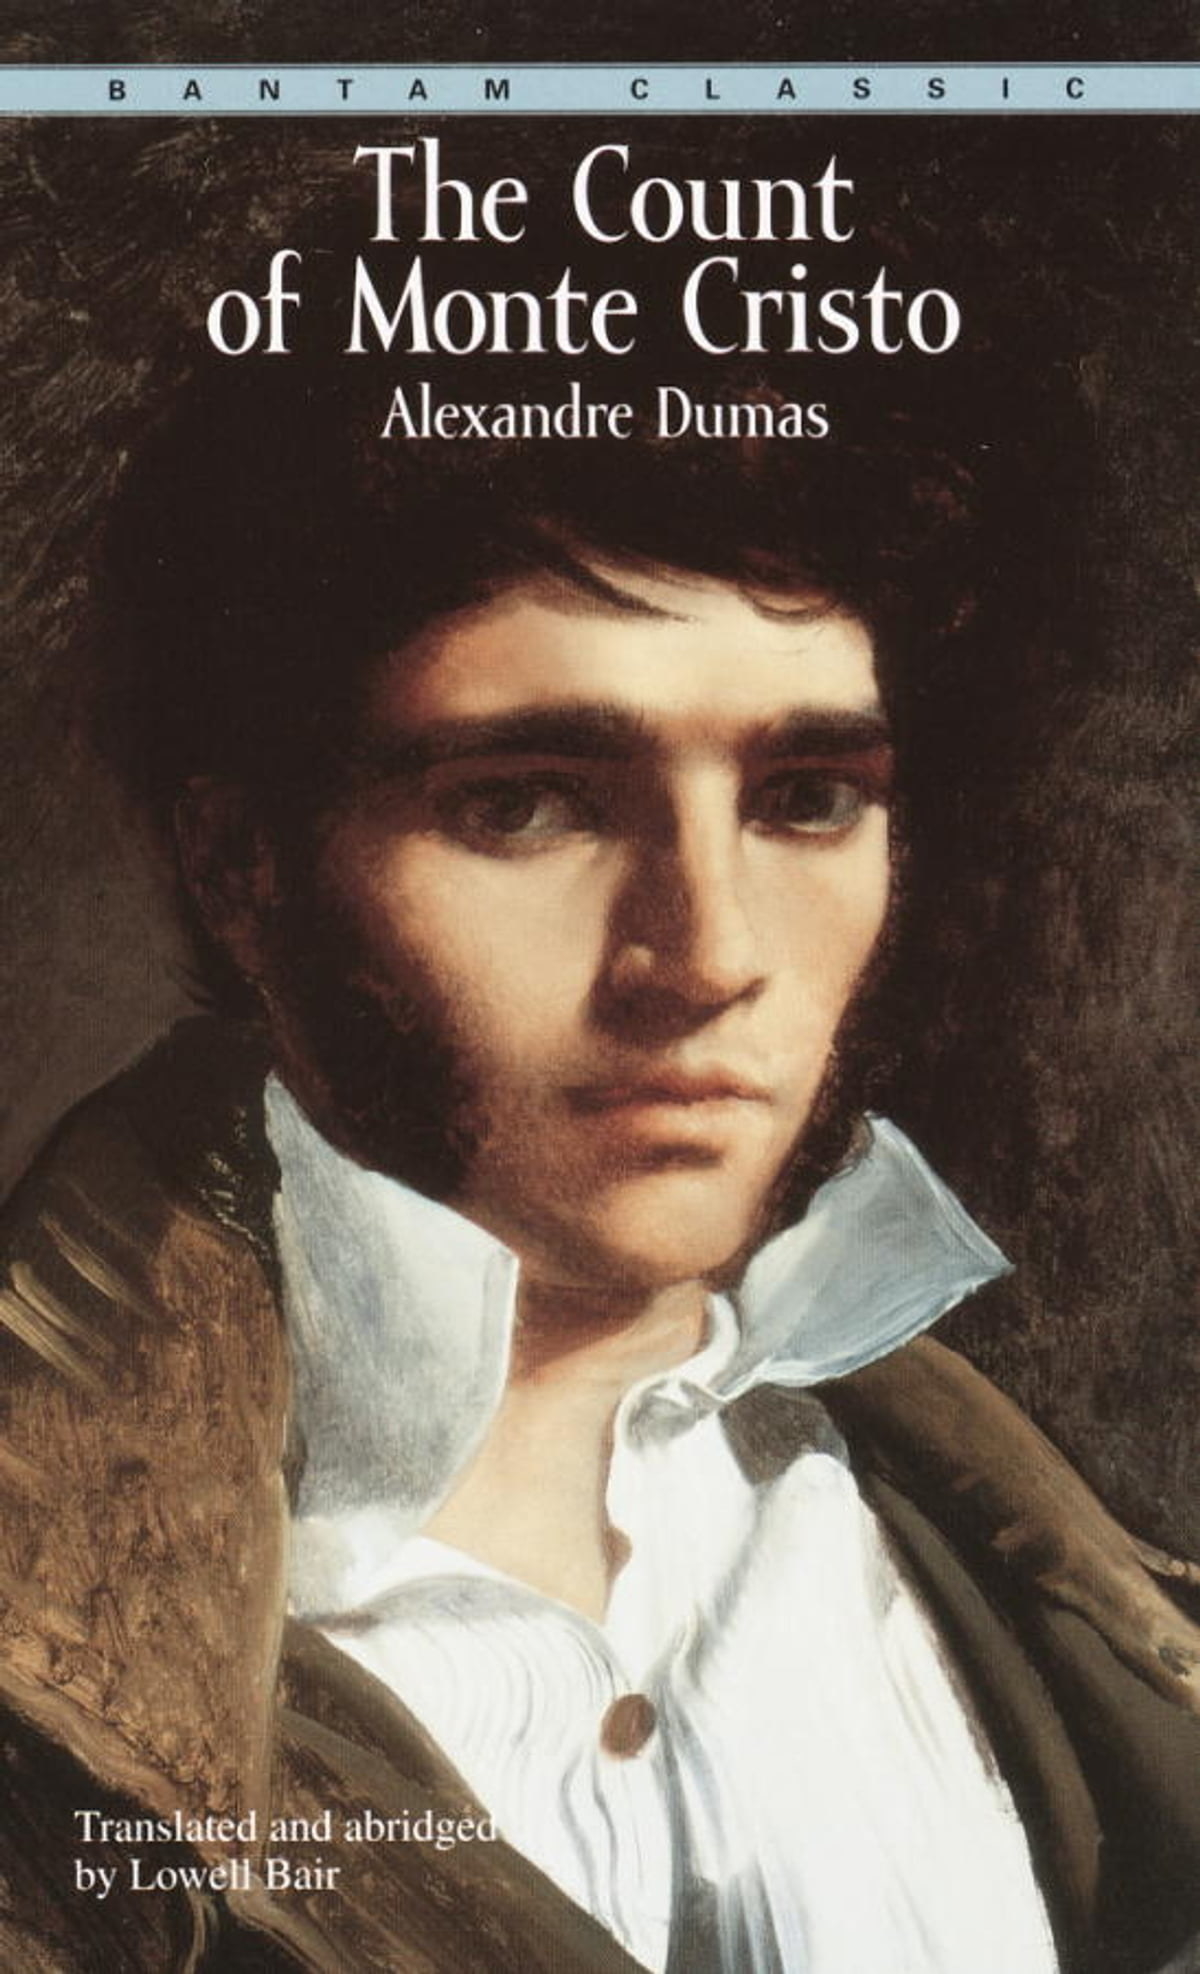 &quot;The Count of Monte Cristo&quot; by Alexandre Dumas